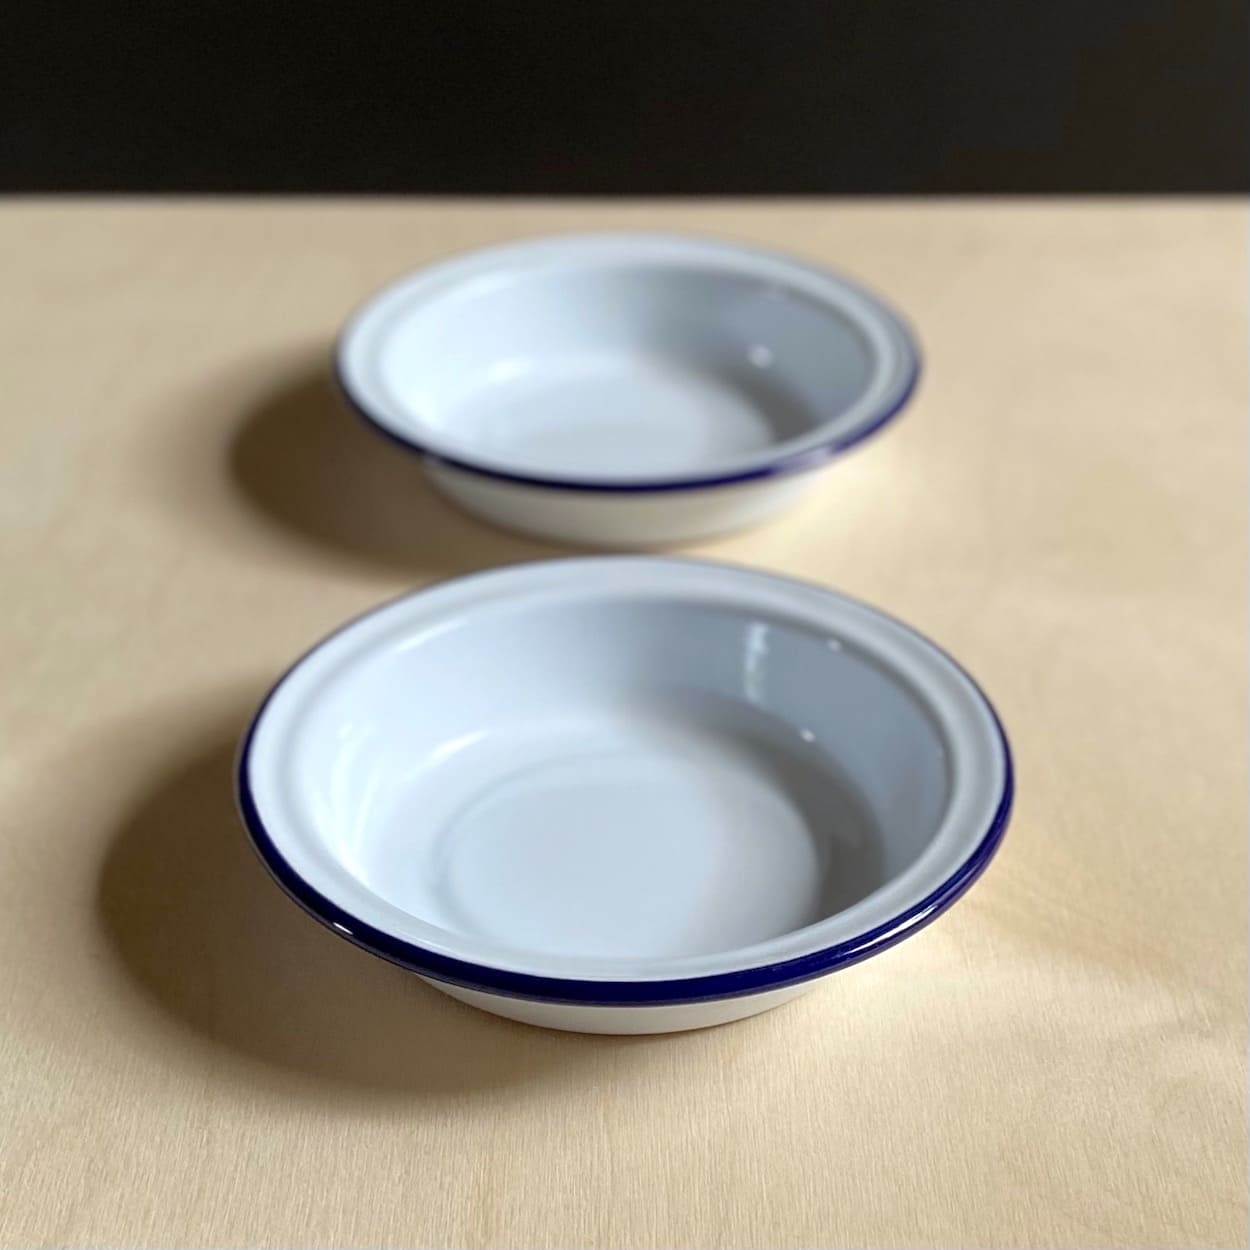 Pair of Blue Rimmed White Enamel Dishes - Small